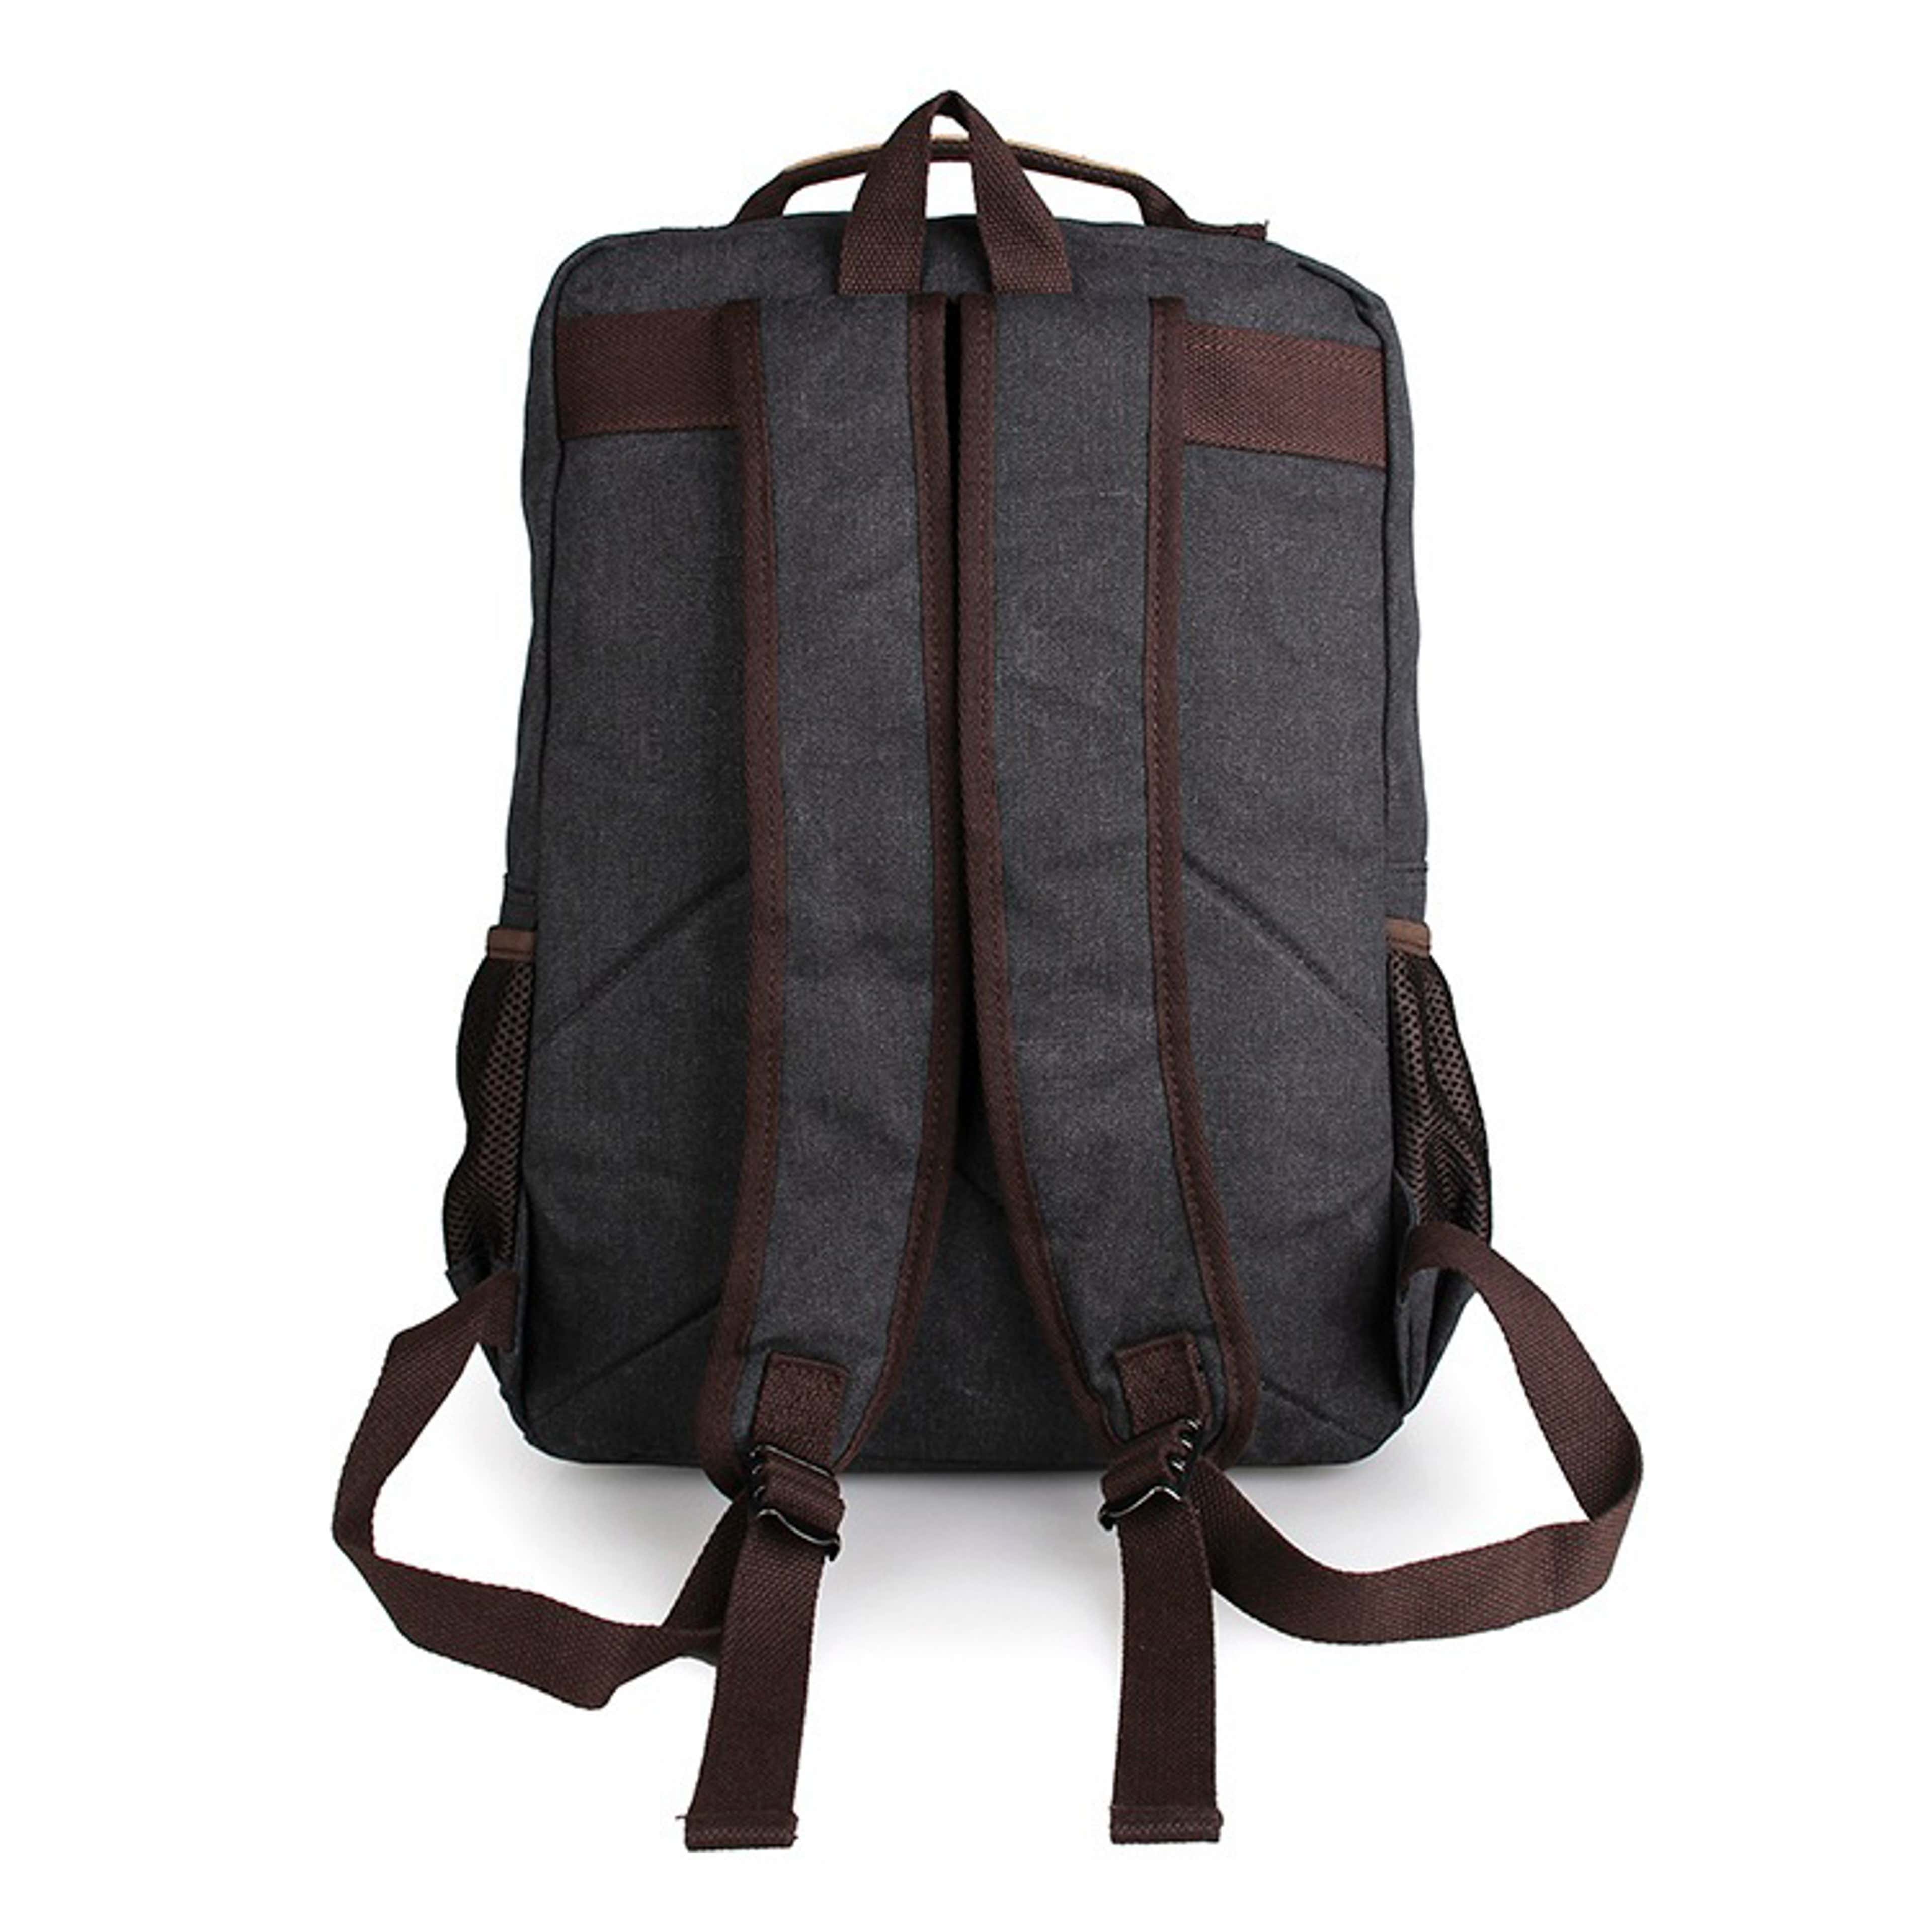 Grey Compact Backpack - 2 - hover gallery